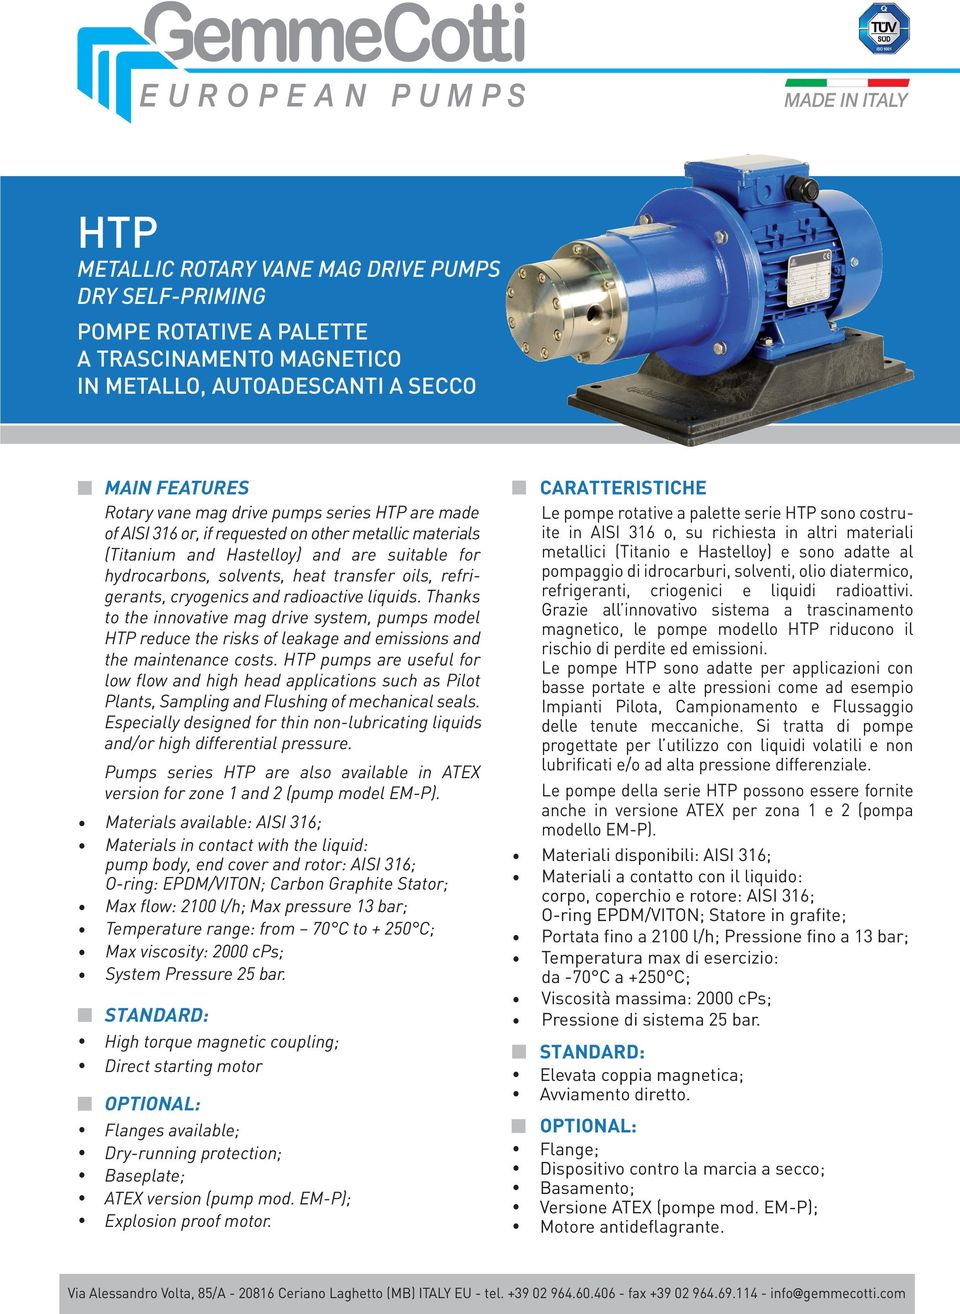 liquids. Thanks to the innovative mag drive system, pumps model HTP reduce the risks of leakage and emissions and the maintenance costs.